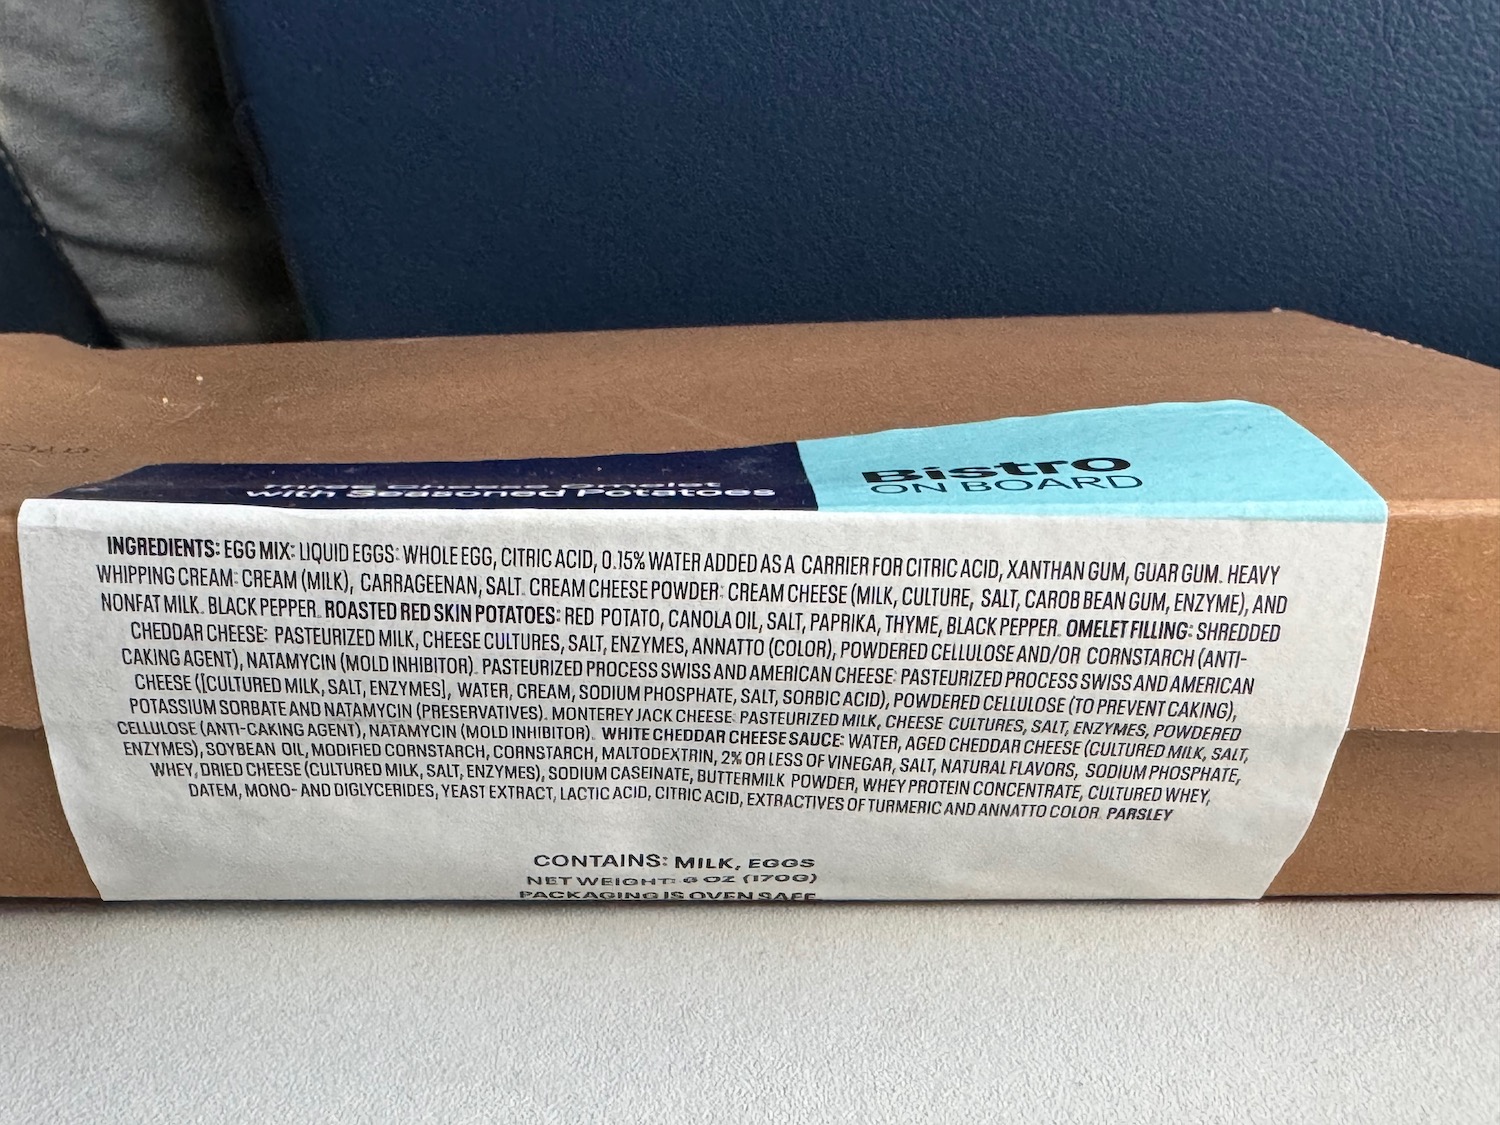 a cardboard box with a label